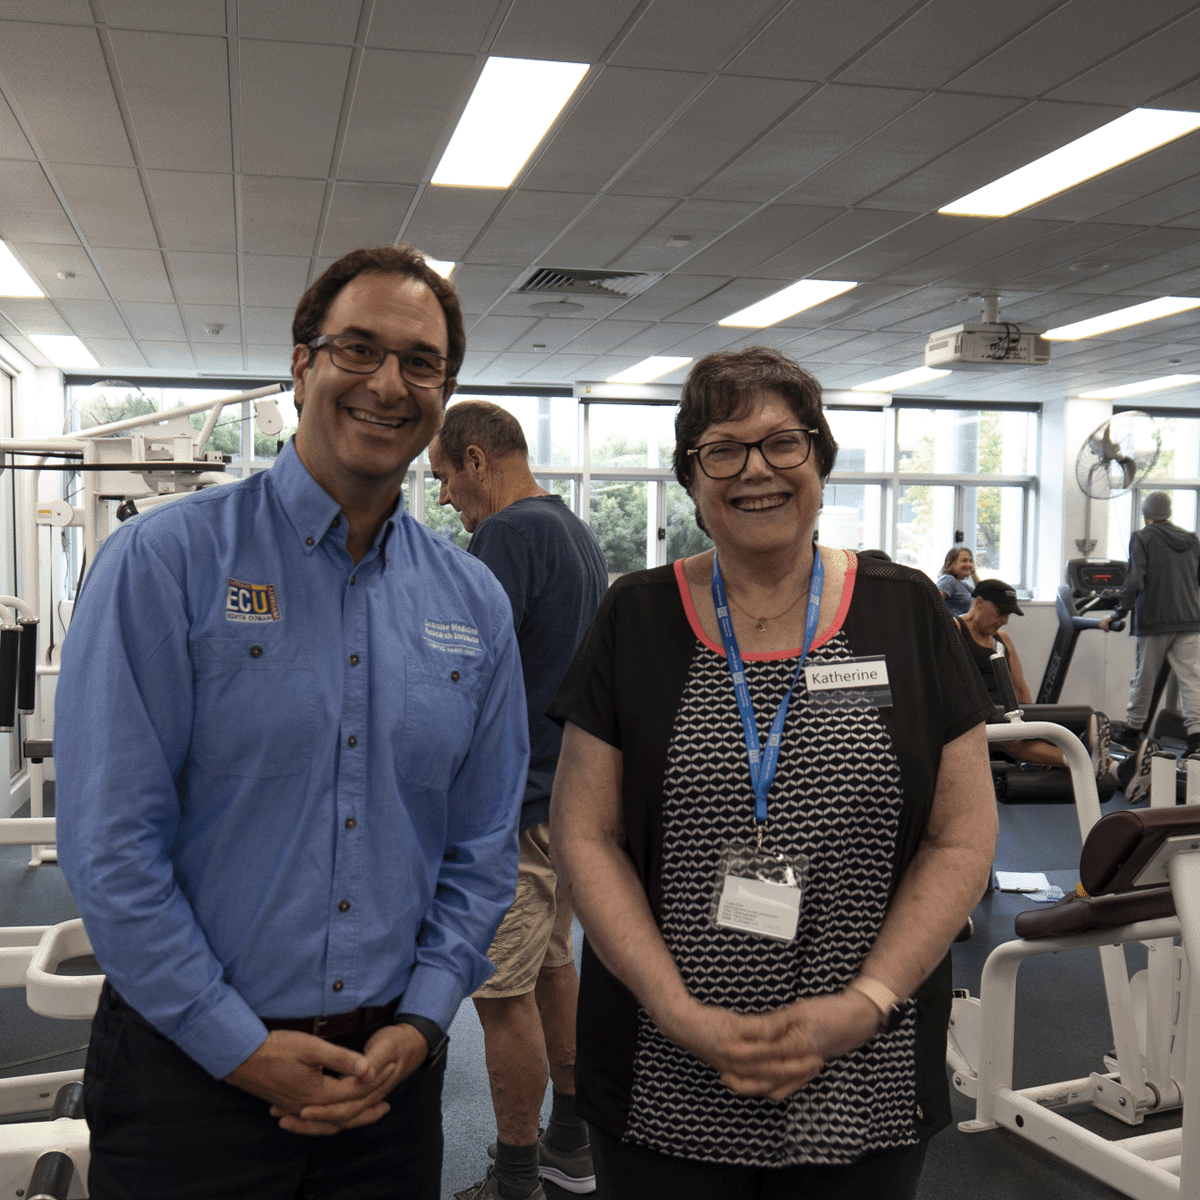 A man and a woman stand smiling at the camera in a gym